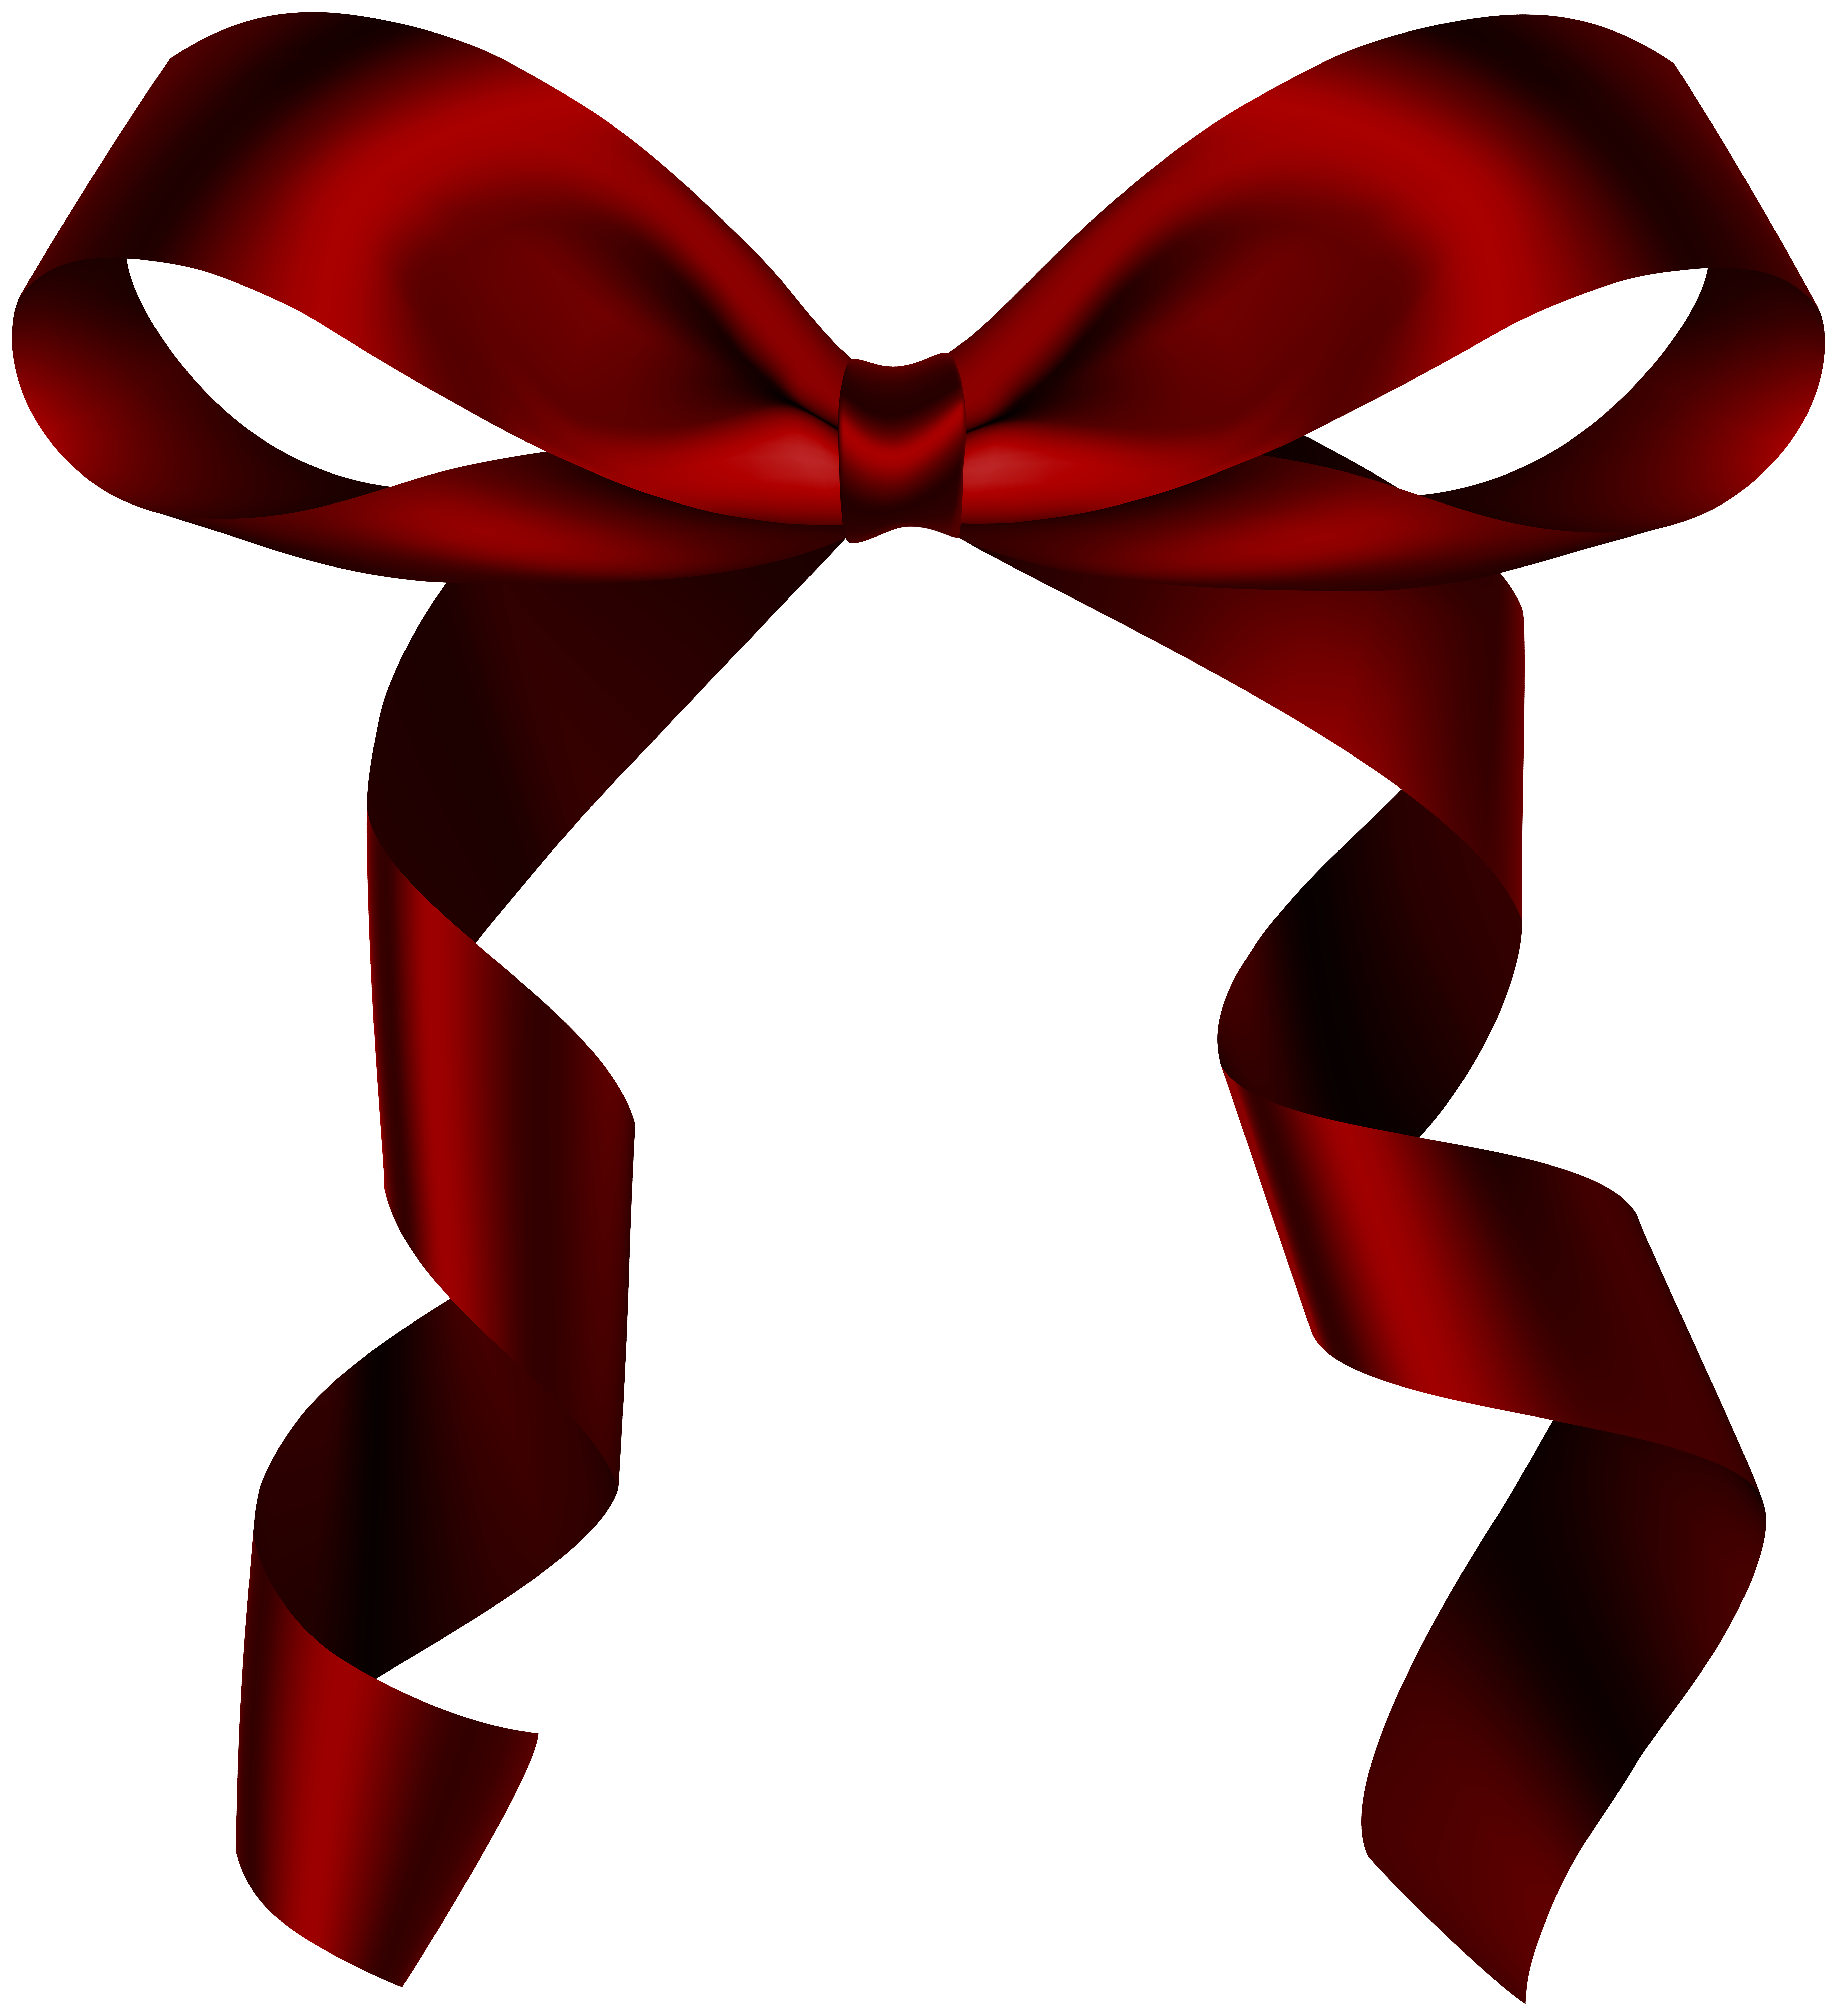 Red Bow Transparent PNG Image​  Gallery Yopriceville - High-Quality Free  Images and Transparent PNG Clipart